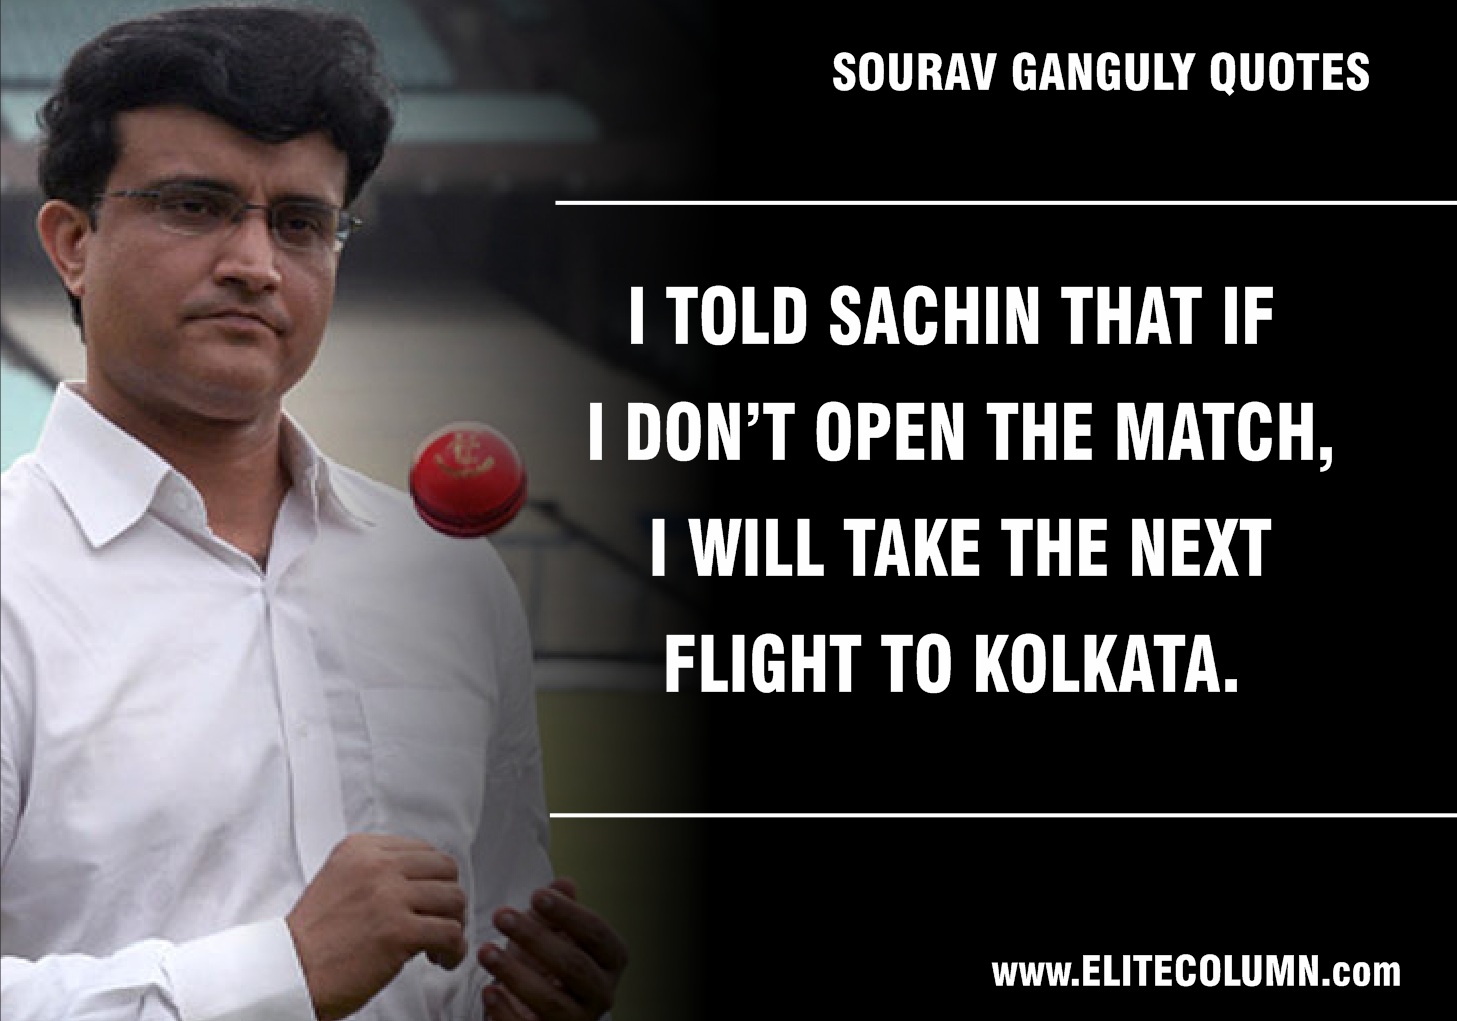 Sourav Ganguly Quotes (5)